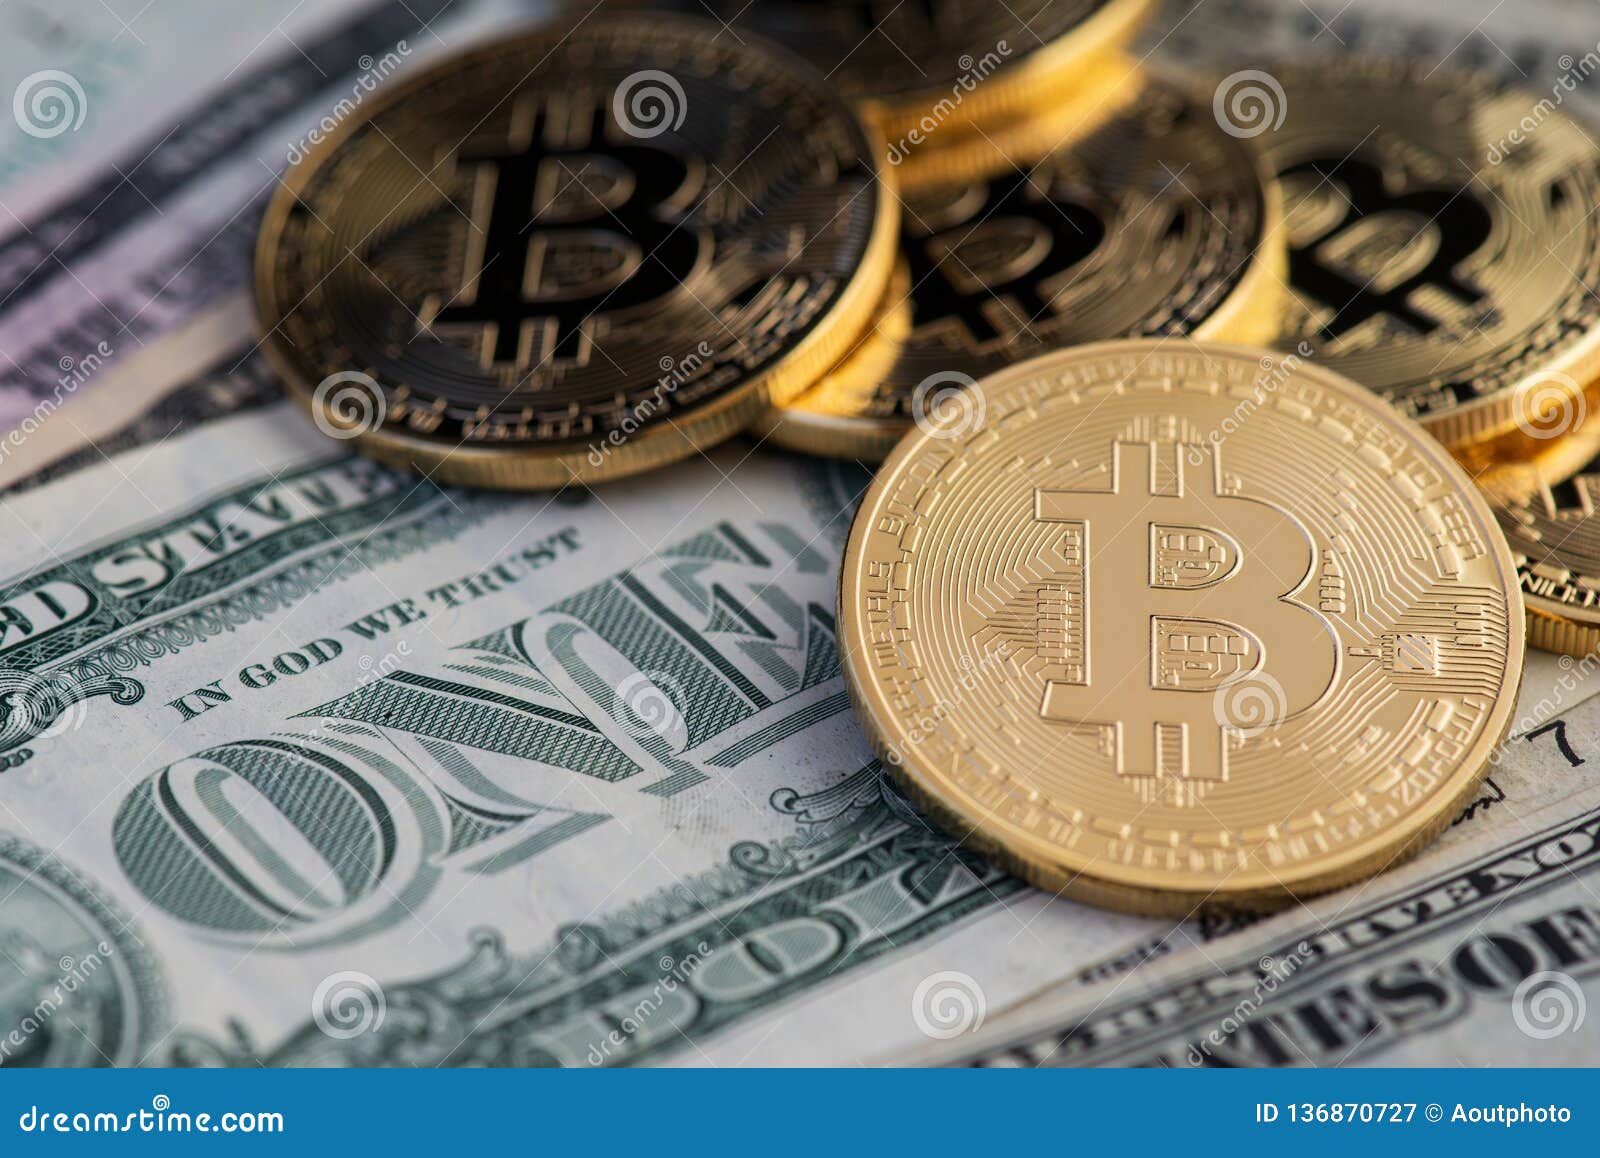 how many us dollars is one bitcoin